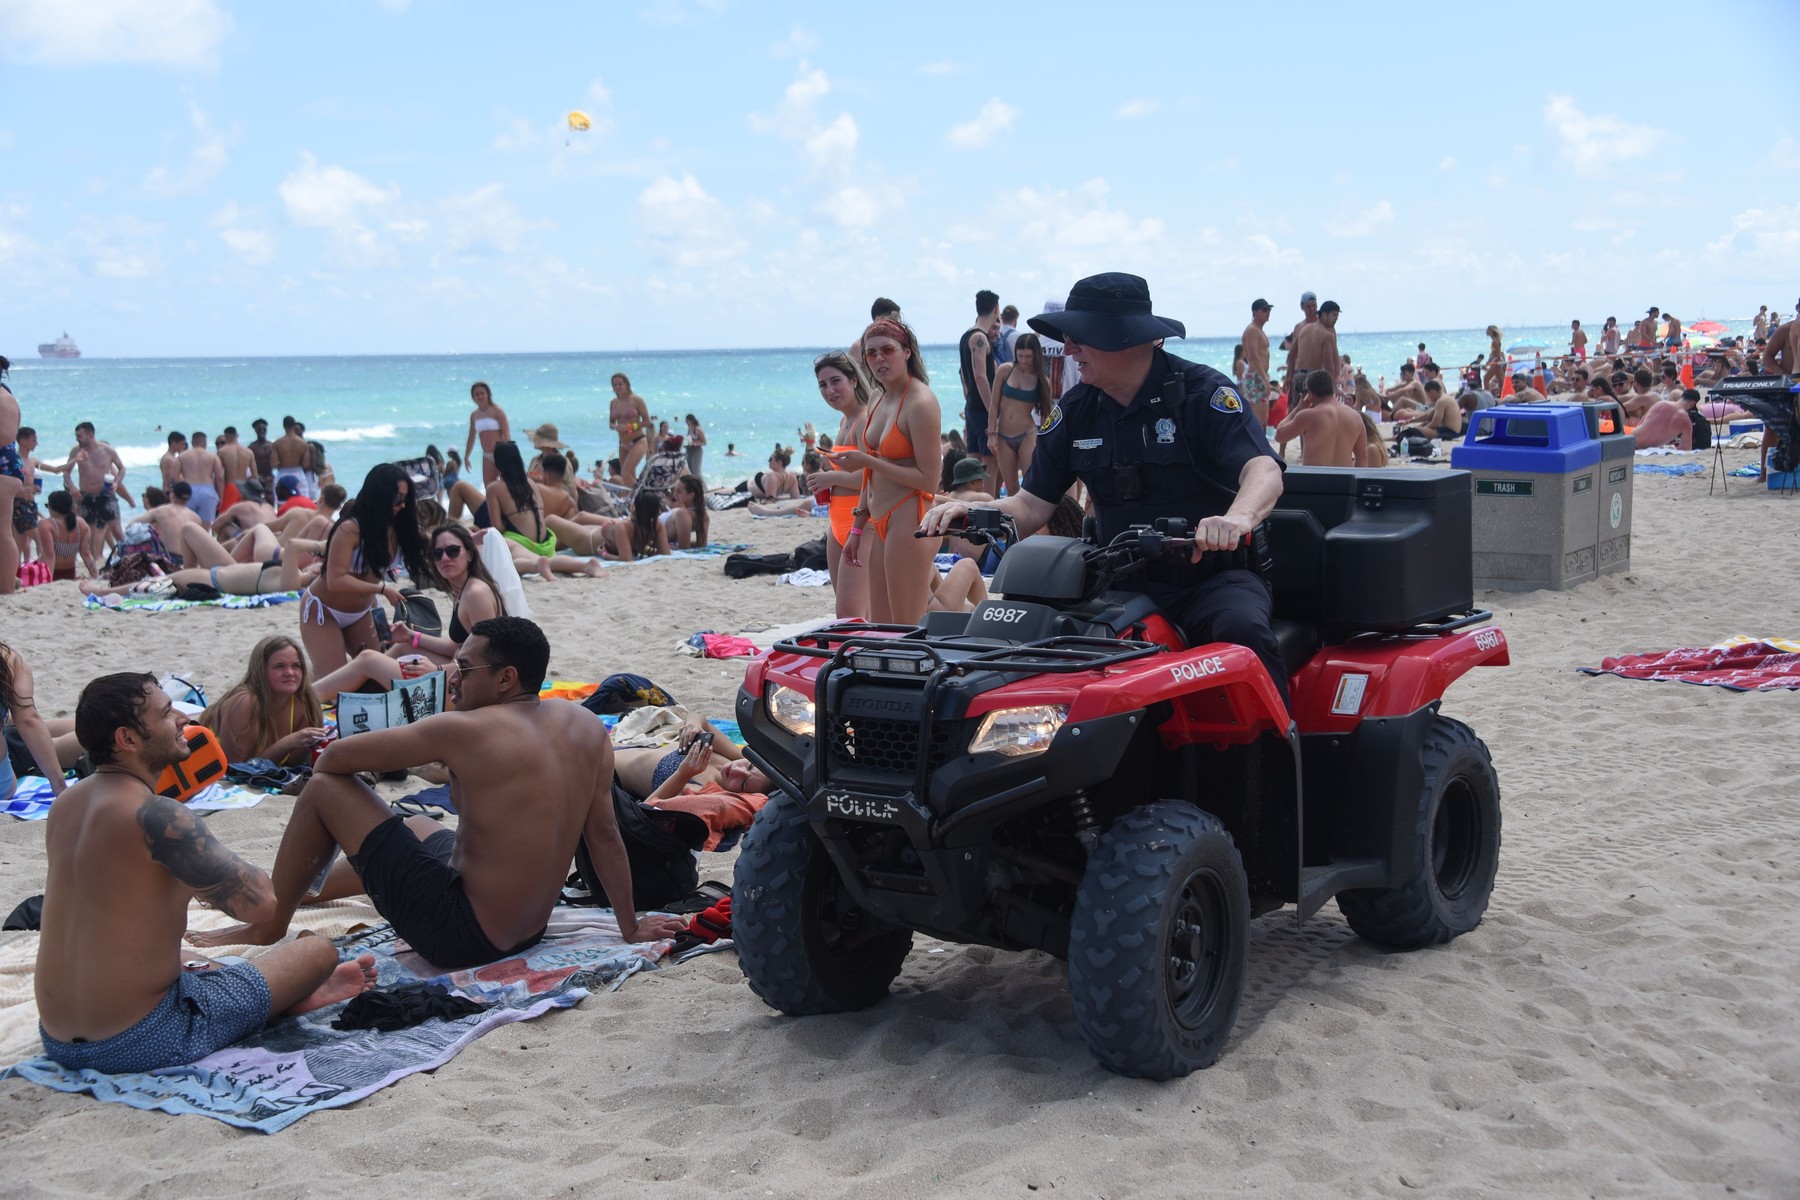 Thousands of scantily-clad Spring Breakers ignore Coronavirus fears as they party on Fort Lauderdale Beach on Saturday while more people are testing for Covid-19 daily in South Florida. The revellers partied as a section of nearby Miami Beach was being  closed and cleared, with city officials saying they are trying to reduce the spread of the novel coronavirus during the height of spring break. The beach, between 7th and 10th street on Ocean Drive, will be shut down starting at 4:30 p.m. Saturday evening, according to city officials.
14 Mar 2020, Image: 506416429, License: Rights-managed, Restrictions: World Rights, Model Release: no, Credit line: Michele Eve Sandberg/MEGA / The Mega Agency / Profimedia